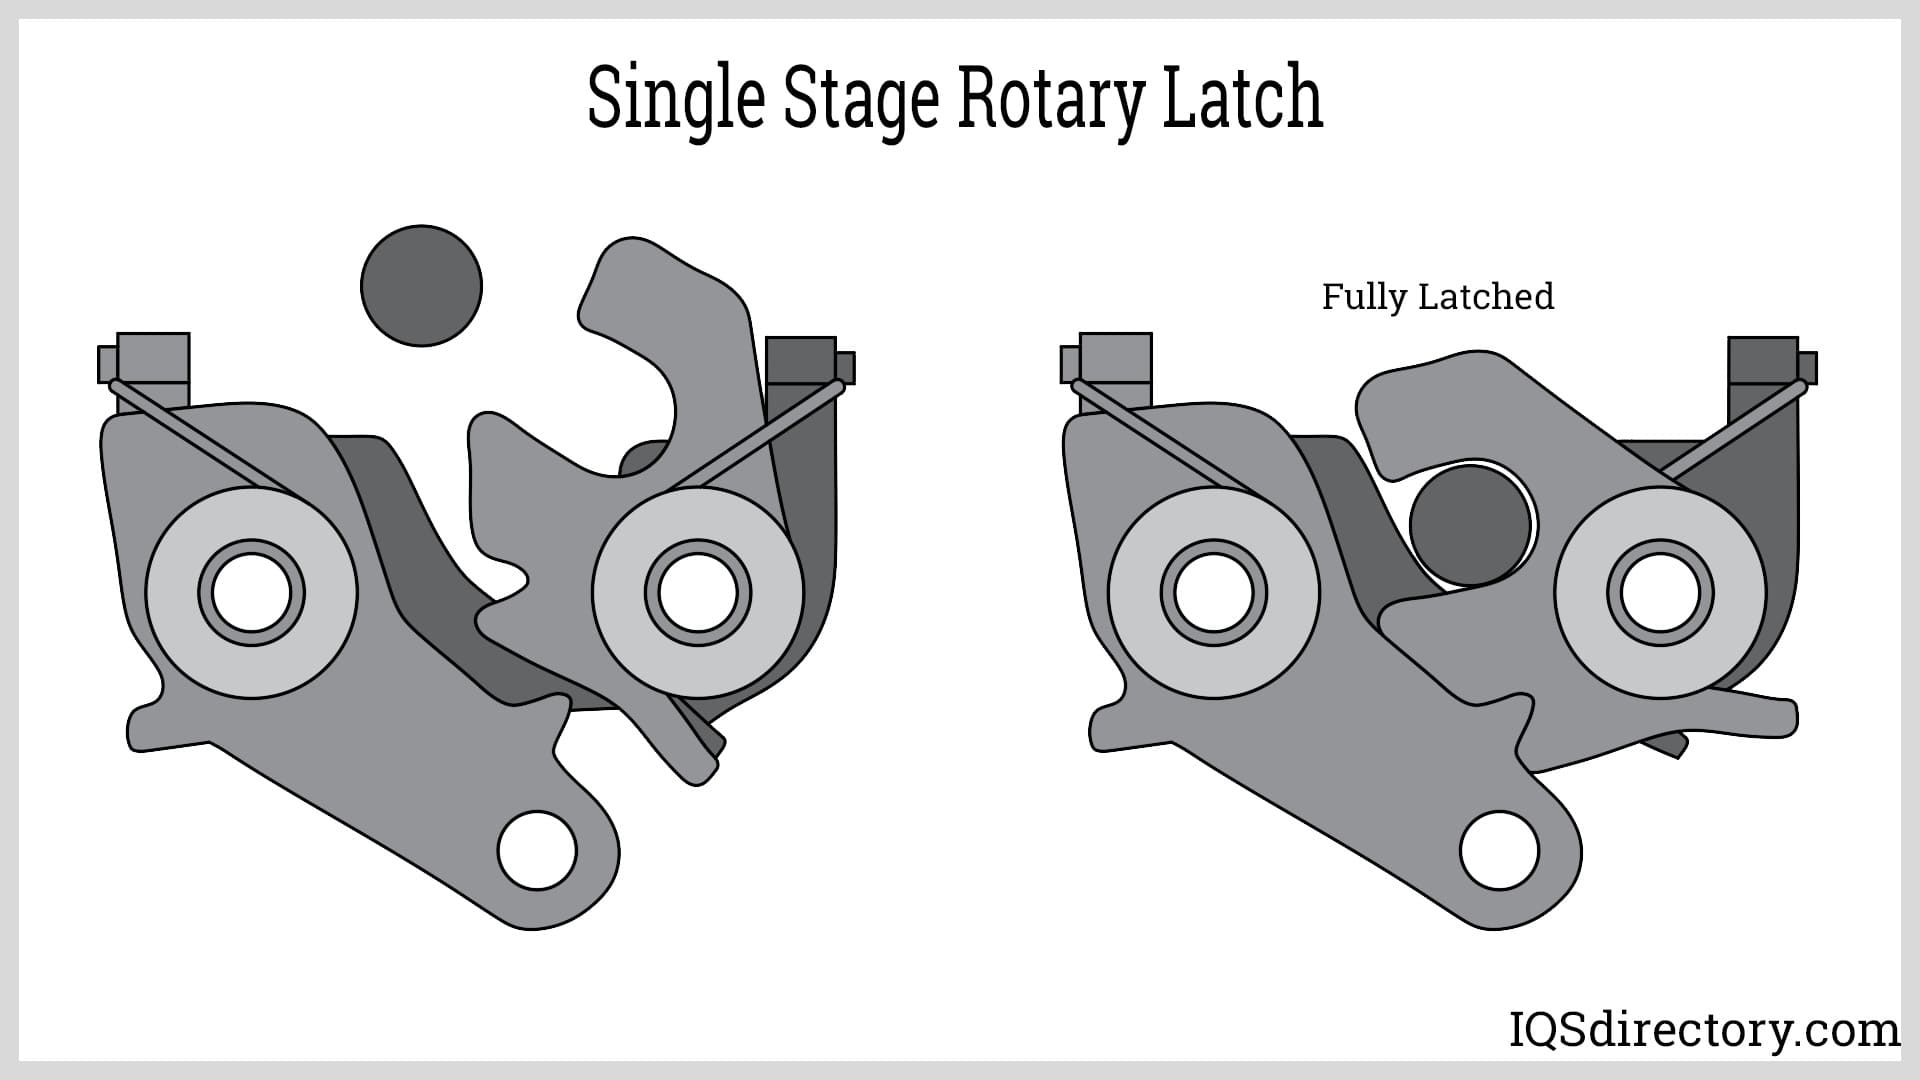 Single Stage Rotary Latch